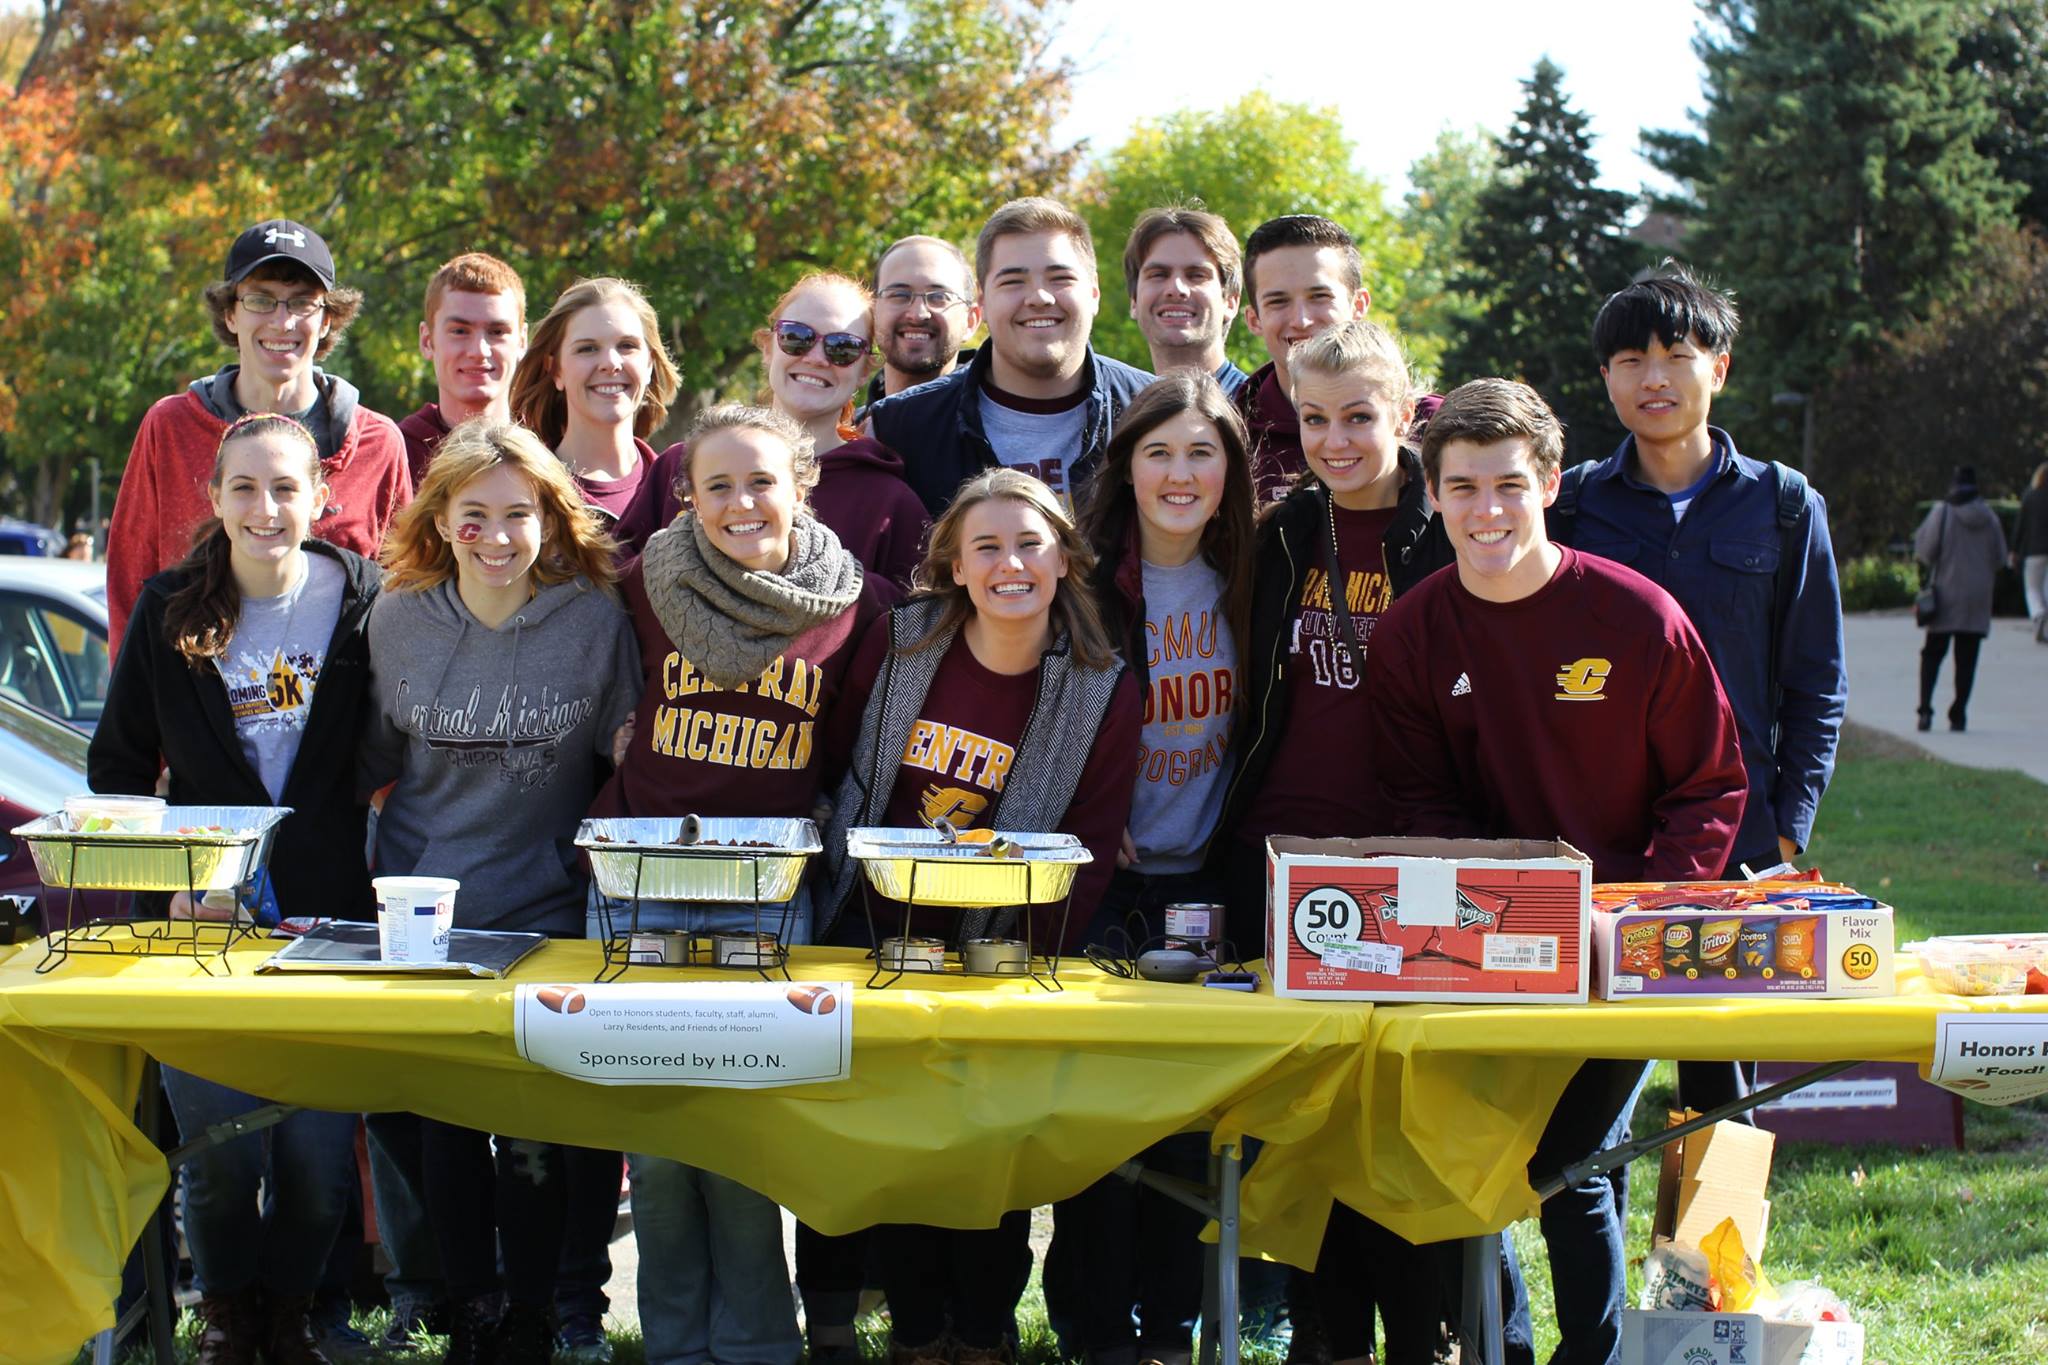 A group of Honors Outreach Network students smiling at the camera while fundraising.